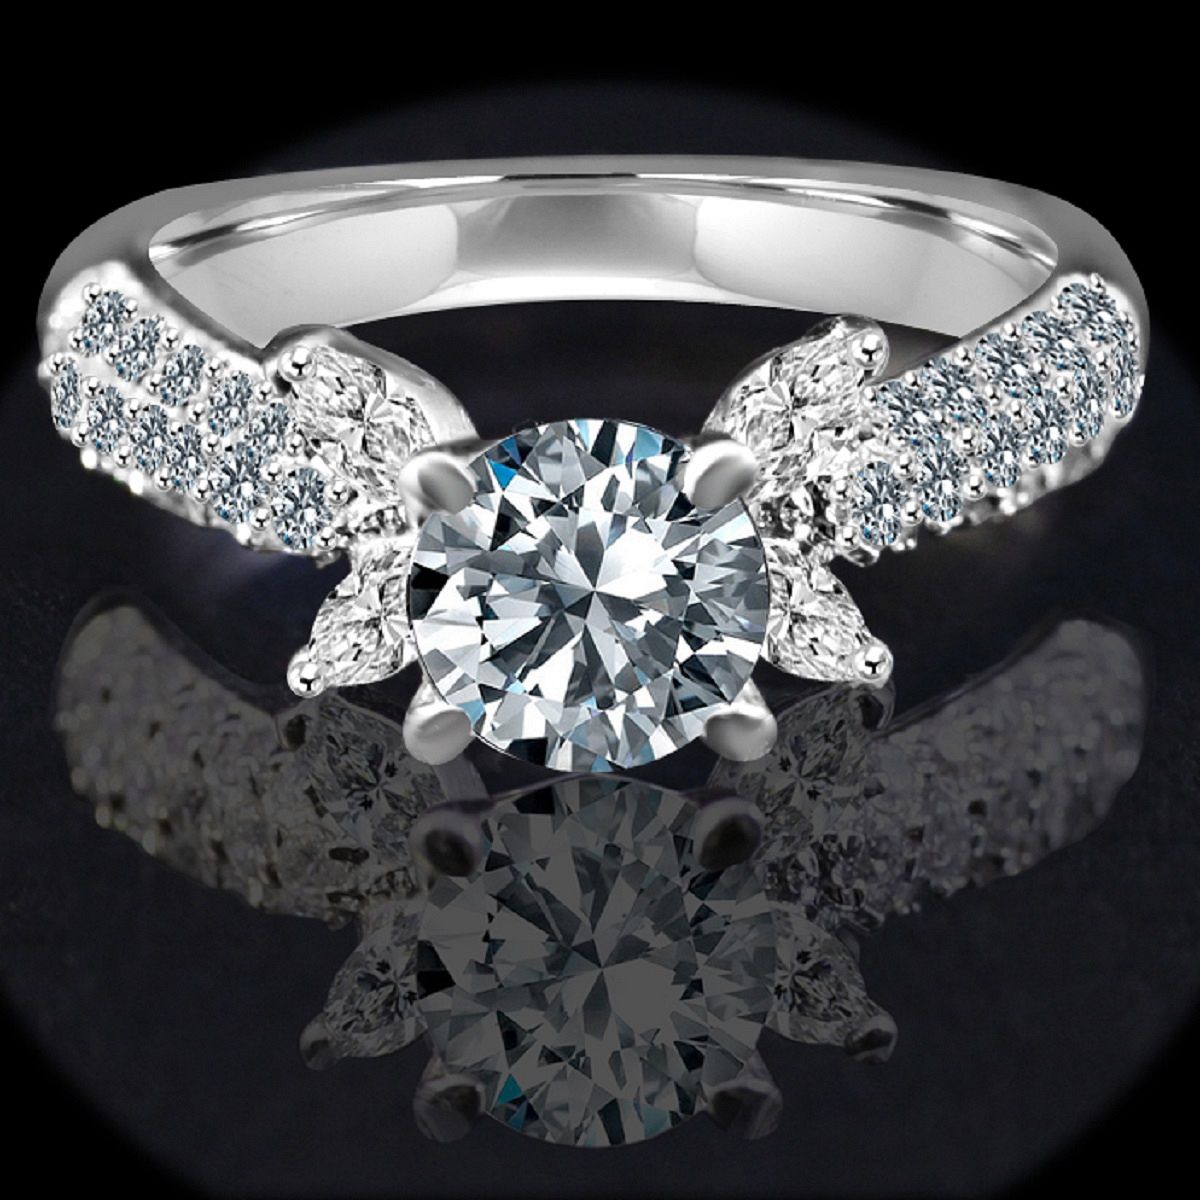 .75 CT. Round Centered simulated Diamond - Diamond Veneer Engagement Sterling Silver Ring. 635R3228